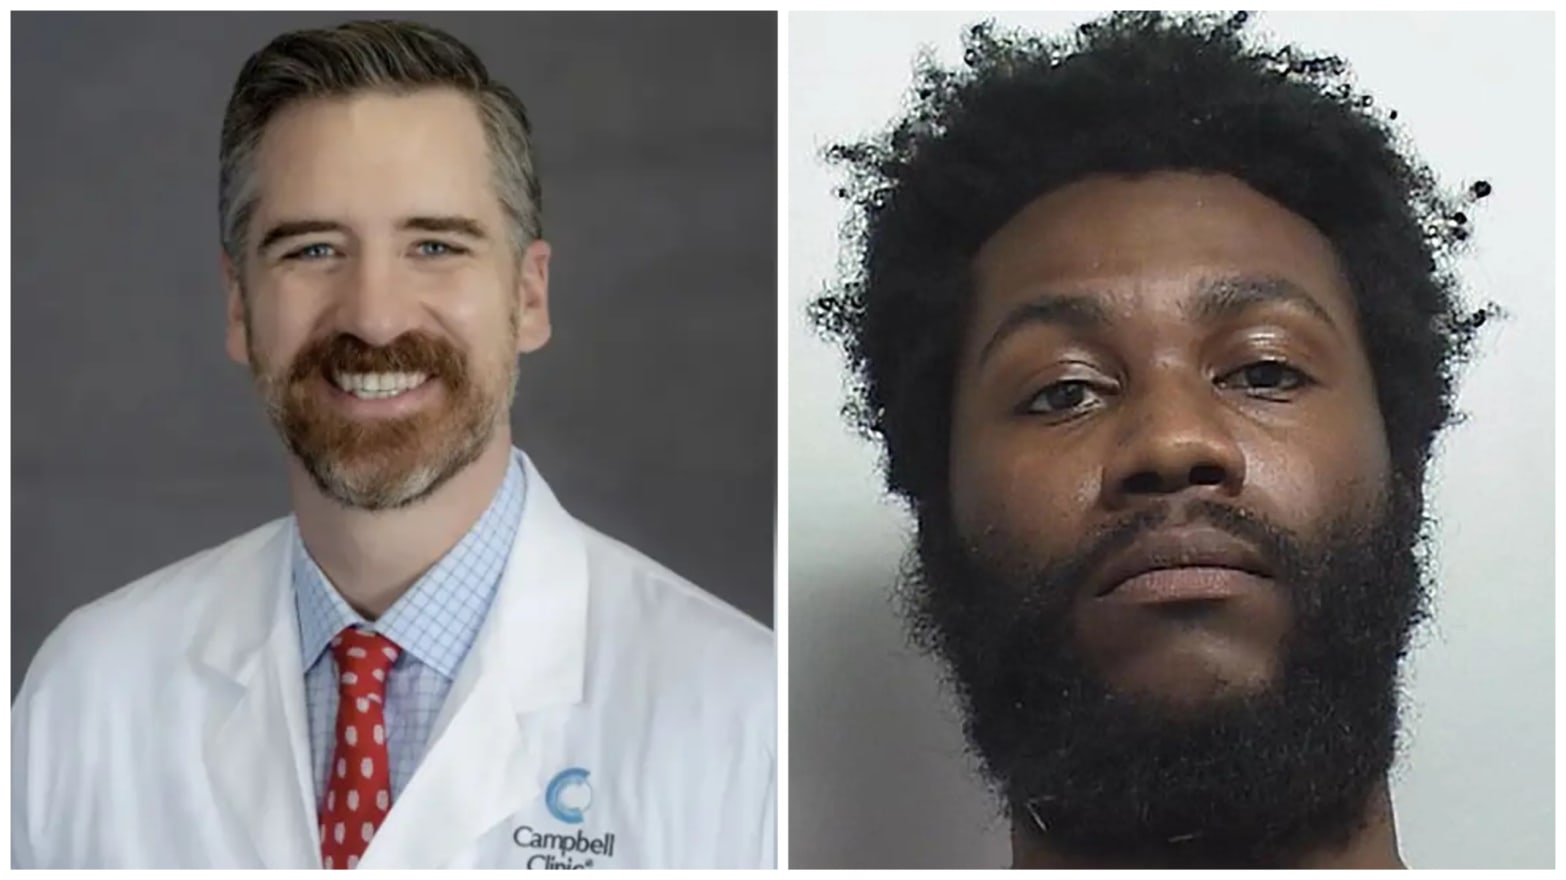 Cops say Benjamin Mauck, left, was shot dead by Larry Pickens, right, in an exam room at his orthopedic practice in Collierville, Tennessee. 